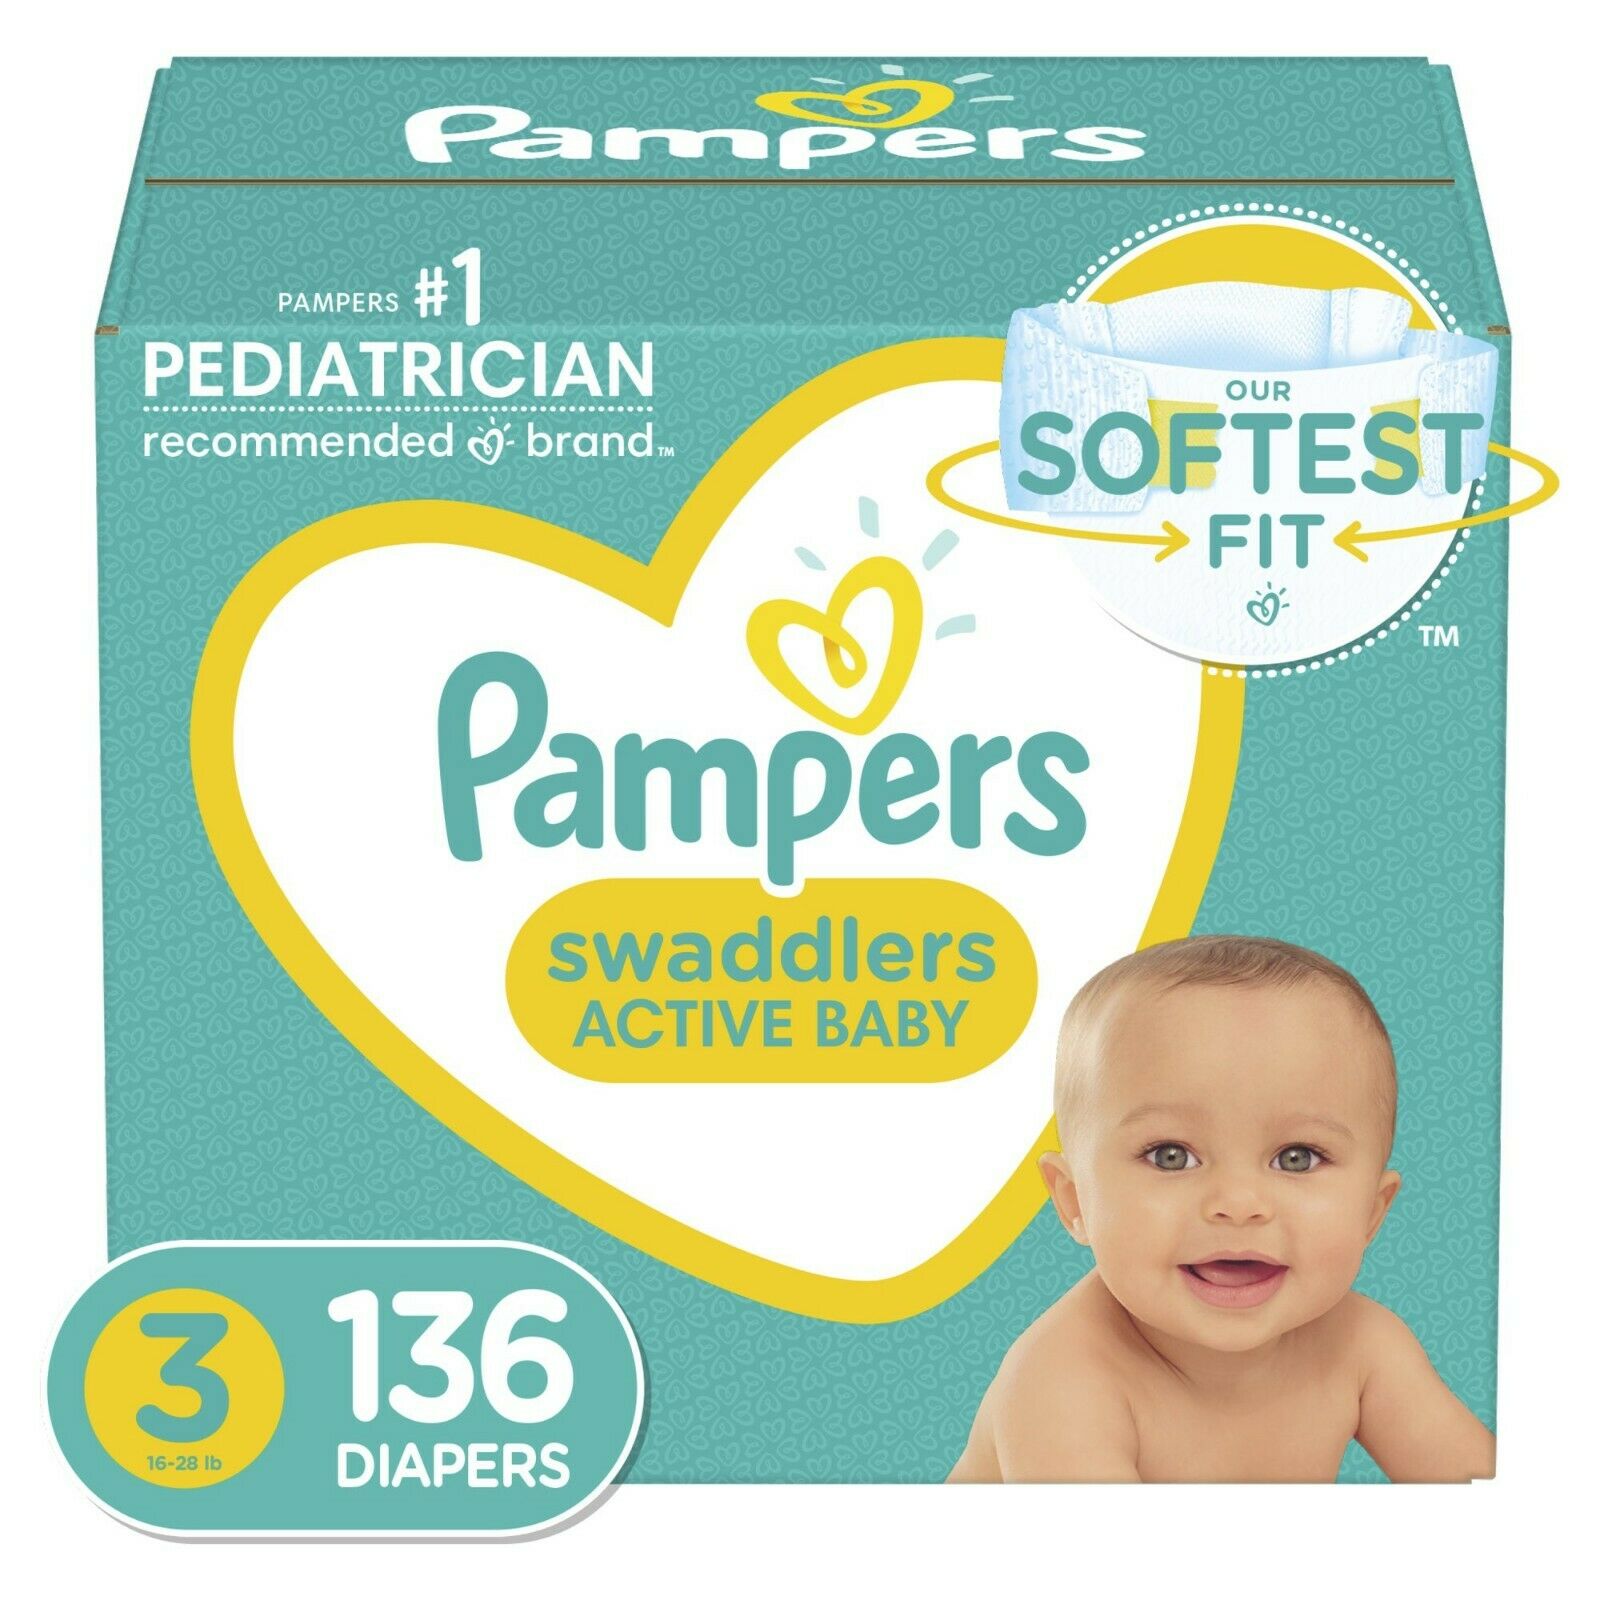 Pampers Swaddlers Diapers, Soft and Absorbent, Size 3, 136 Ct